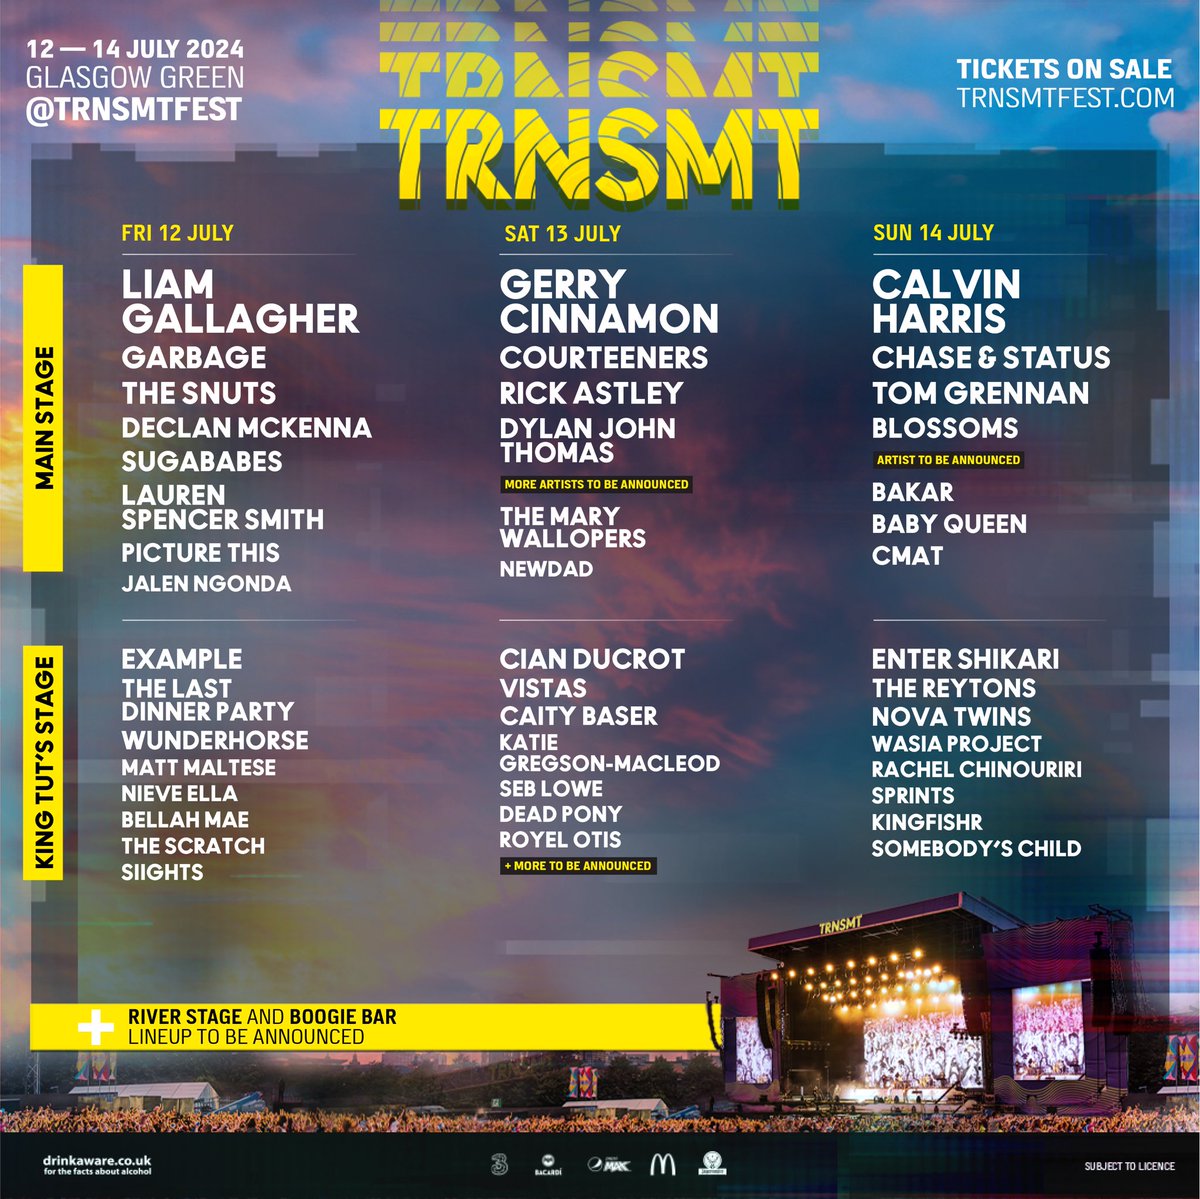 First festival announcement of 24 for us @TRNSMTfest we cannot WAIT to be back 🏴󠁧󠁢󠁳󠁣󠁴󠁿🏴󠁧󠁢󠁳󠁣󠁴󠁿 trnsmtfest.com/tickets